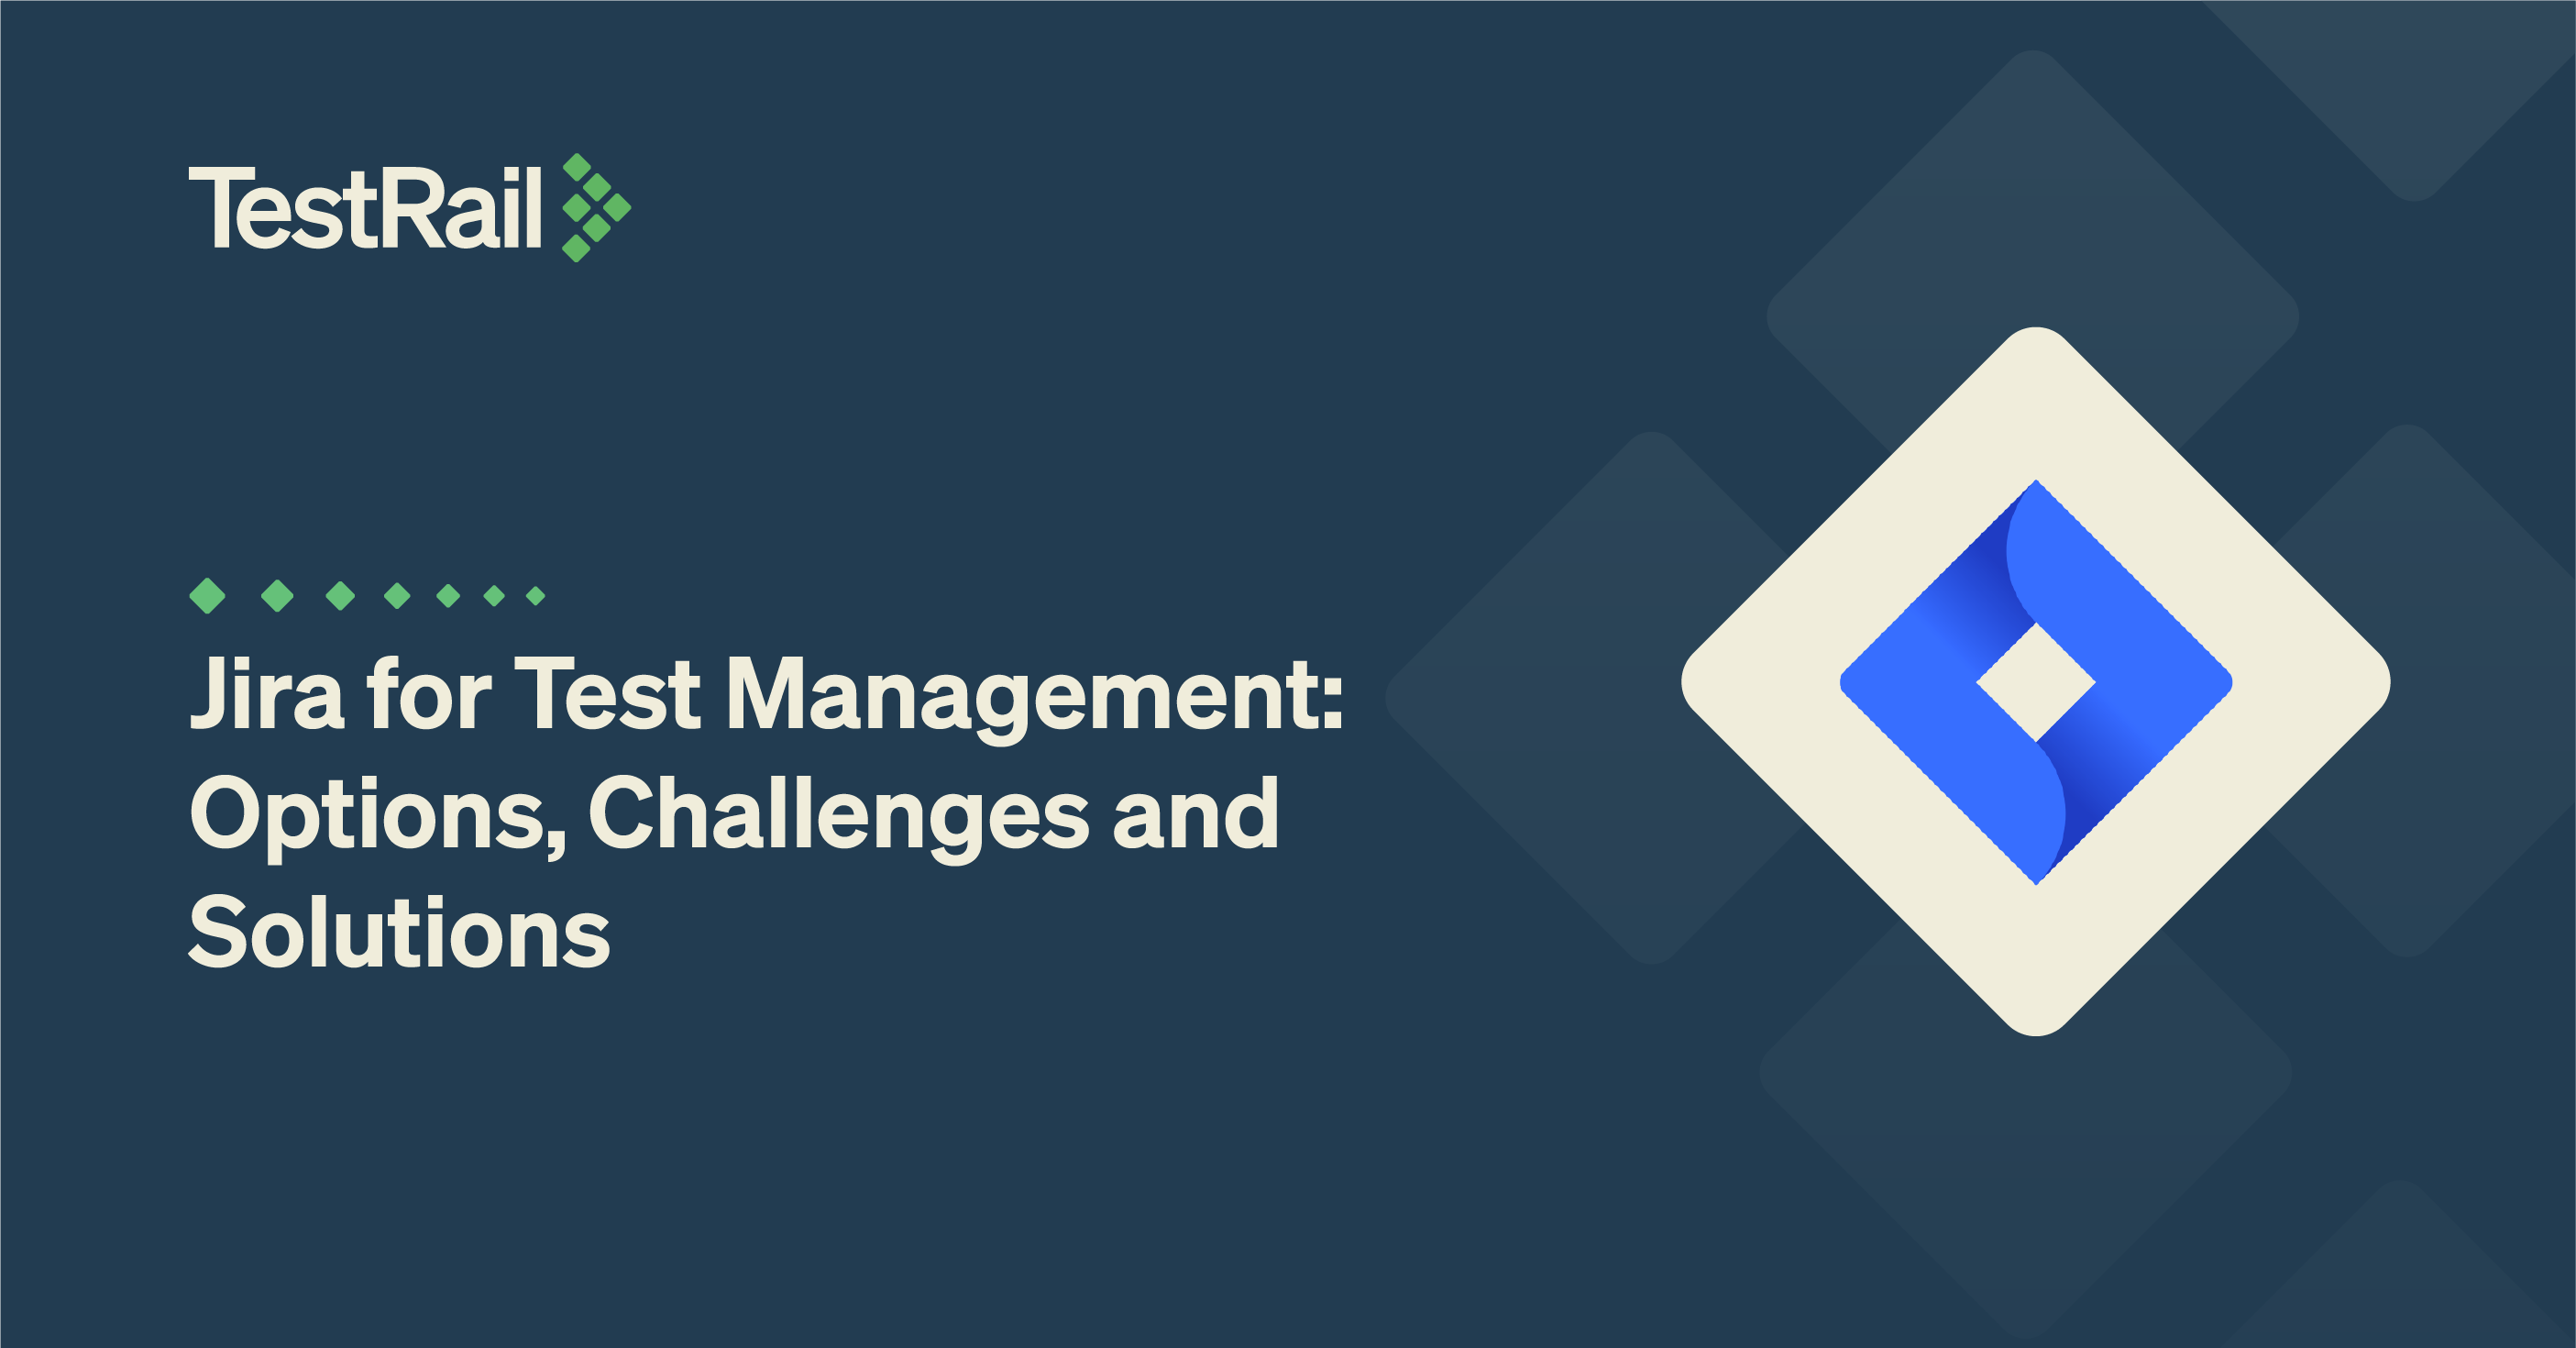 Jira for Test Management: Options, Challenges, and Solutions